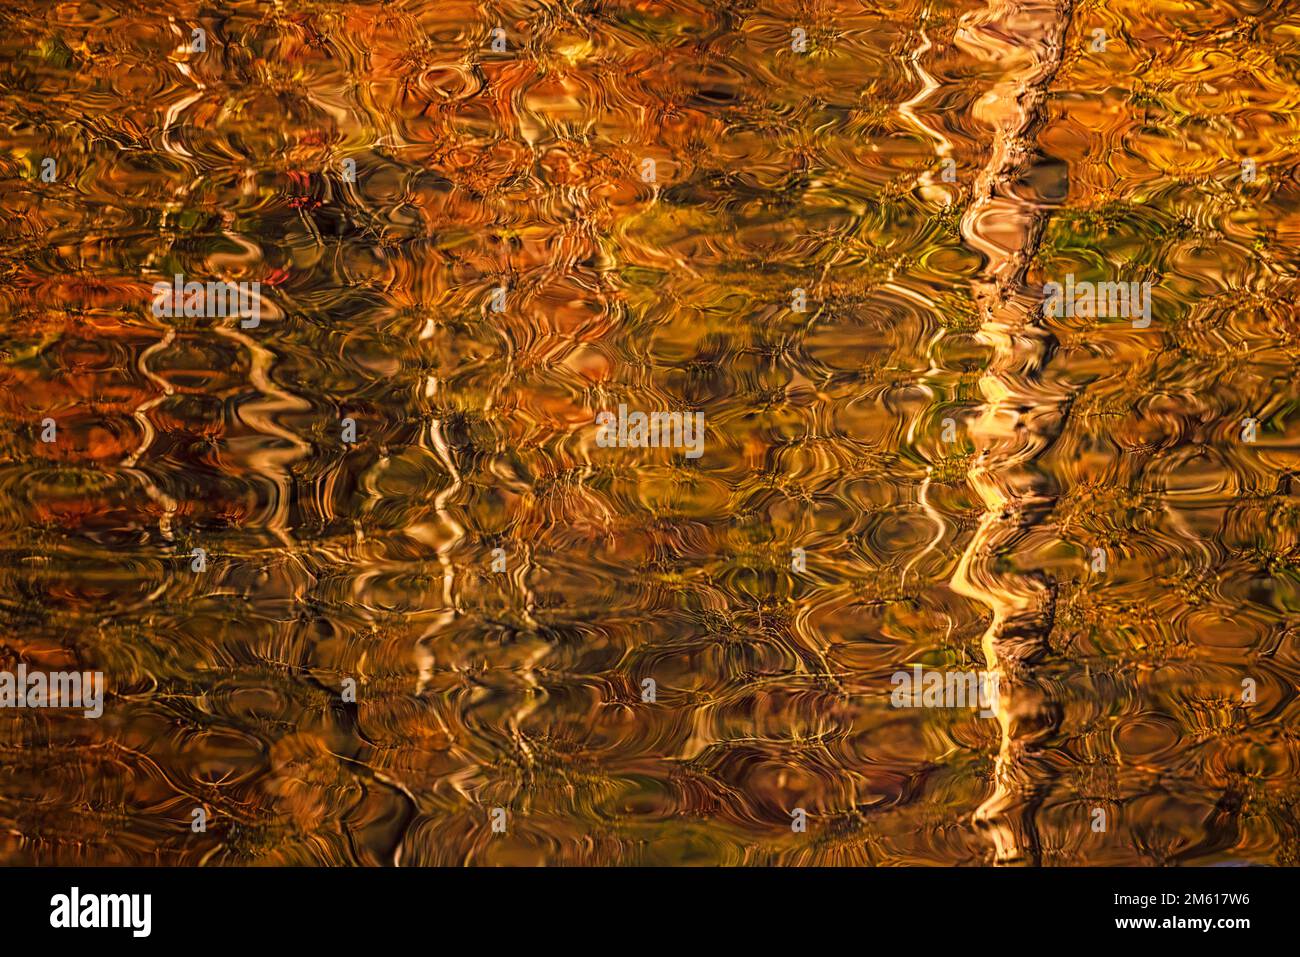 Colorful autumn reflections in the Little Pigeon River near Townsend, Tennessee Stock Photo